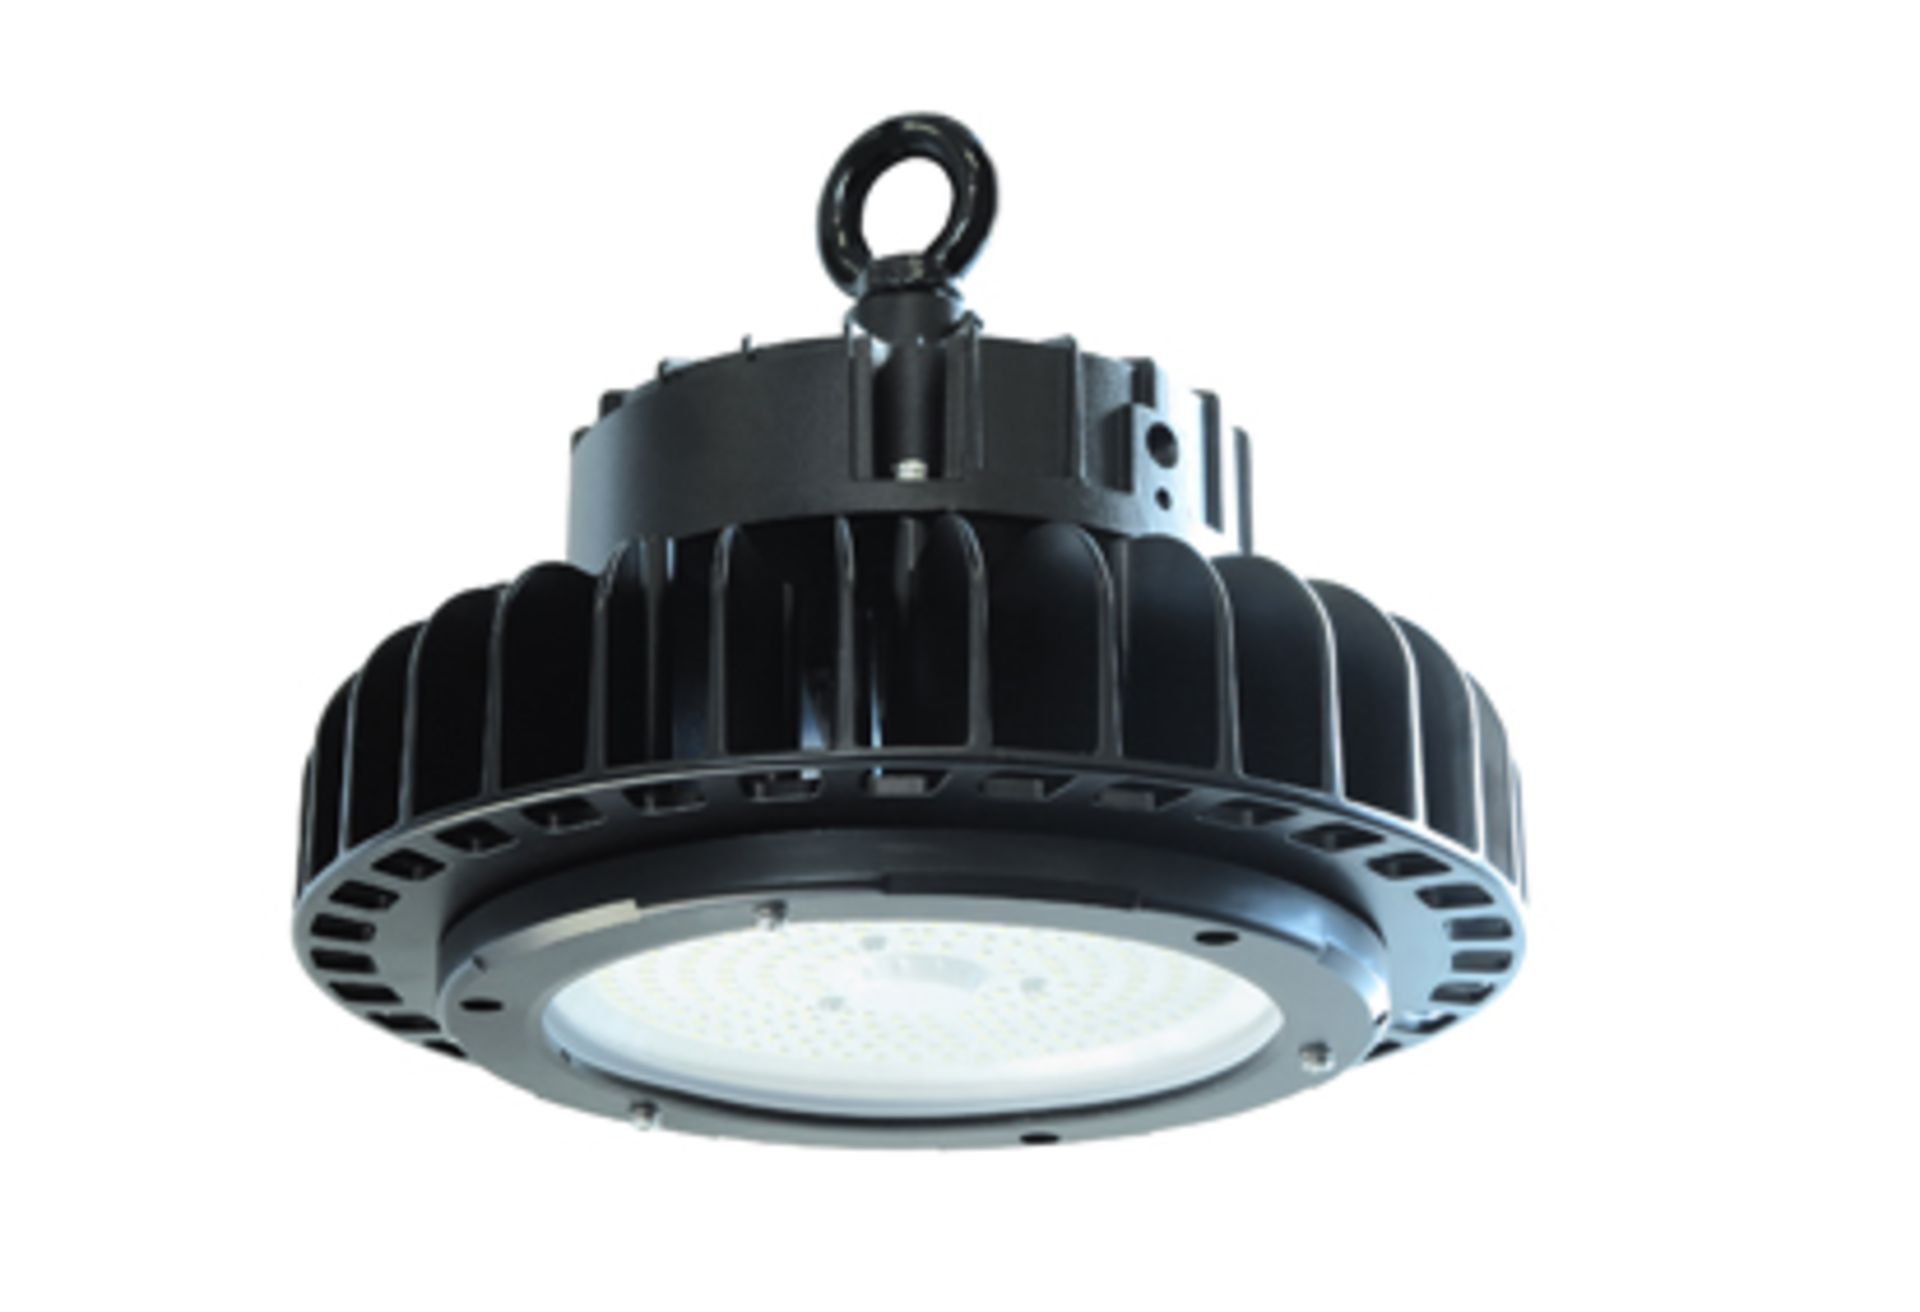 1 150w 25500LM High Bay Light, product code T8HB25500A (located on mezzanine) - Image 4 of 5